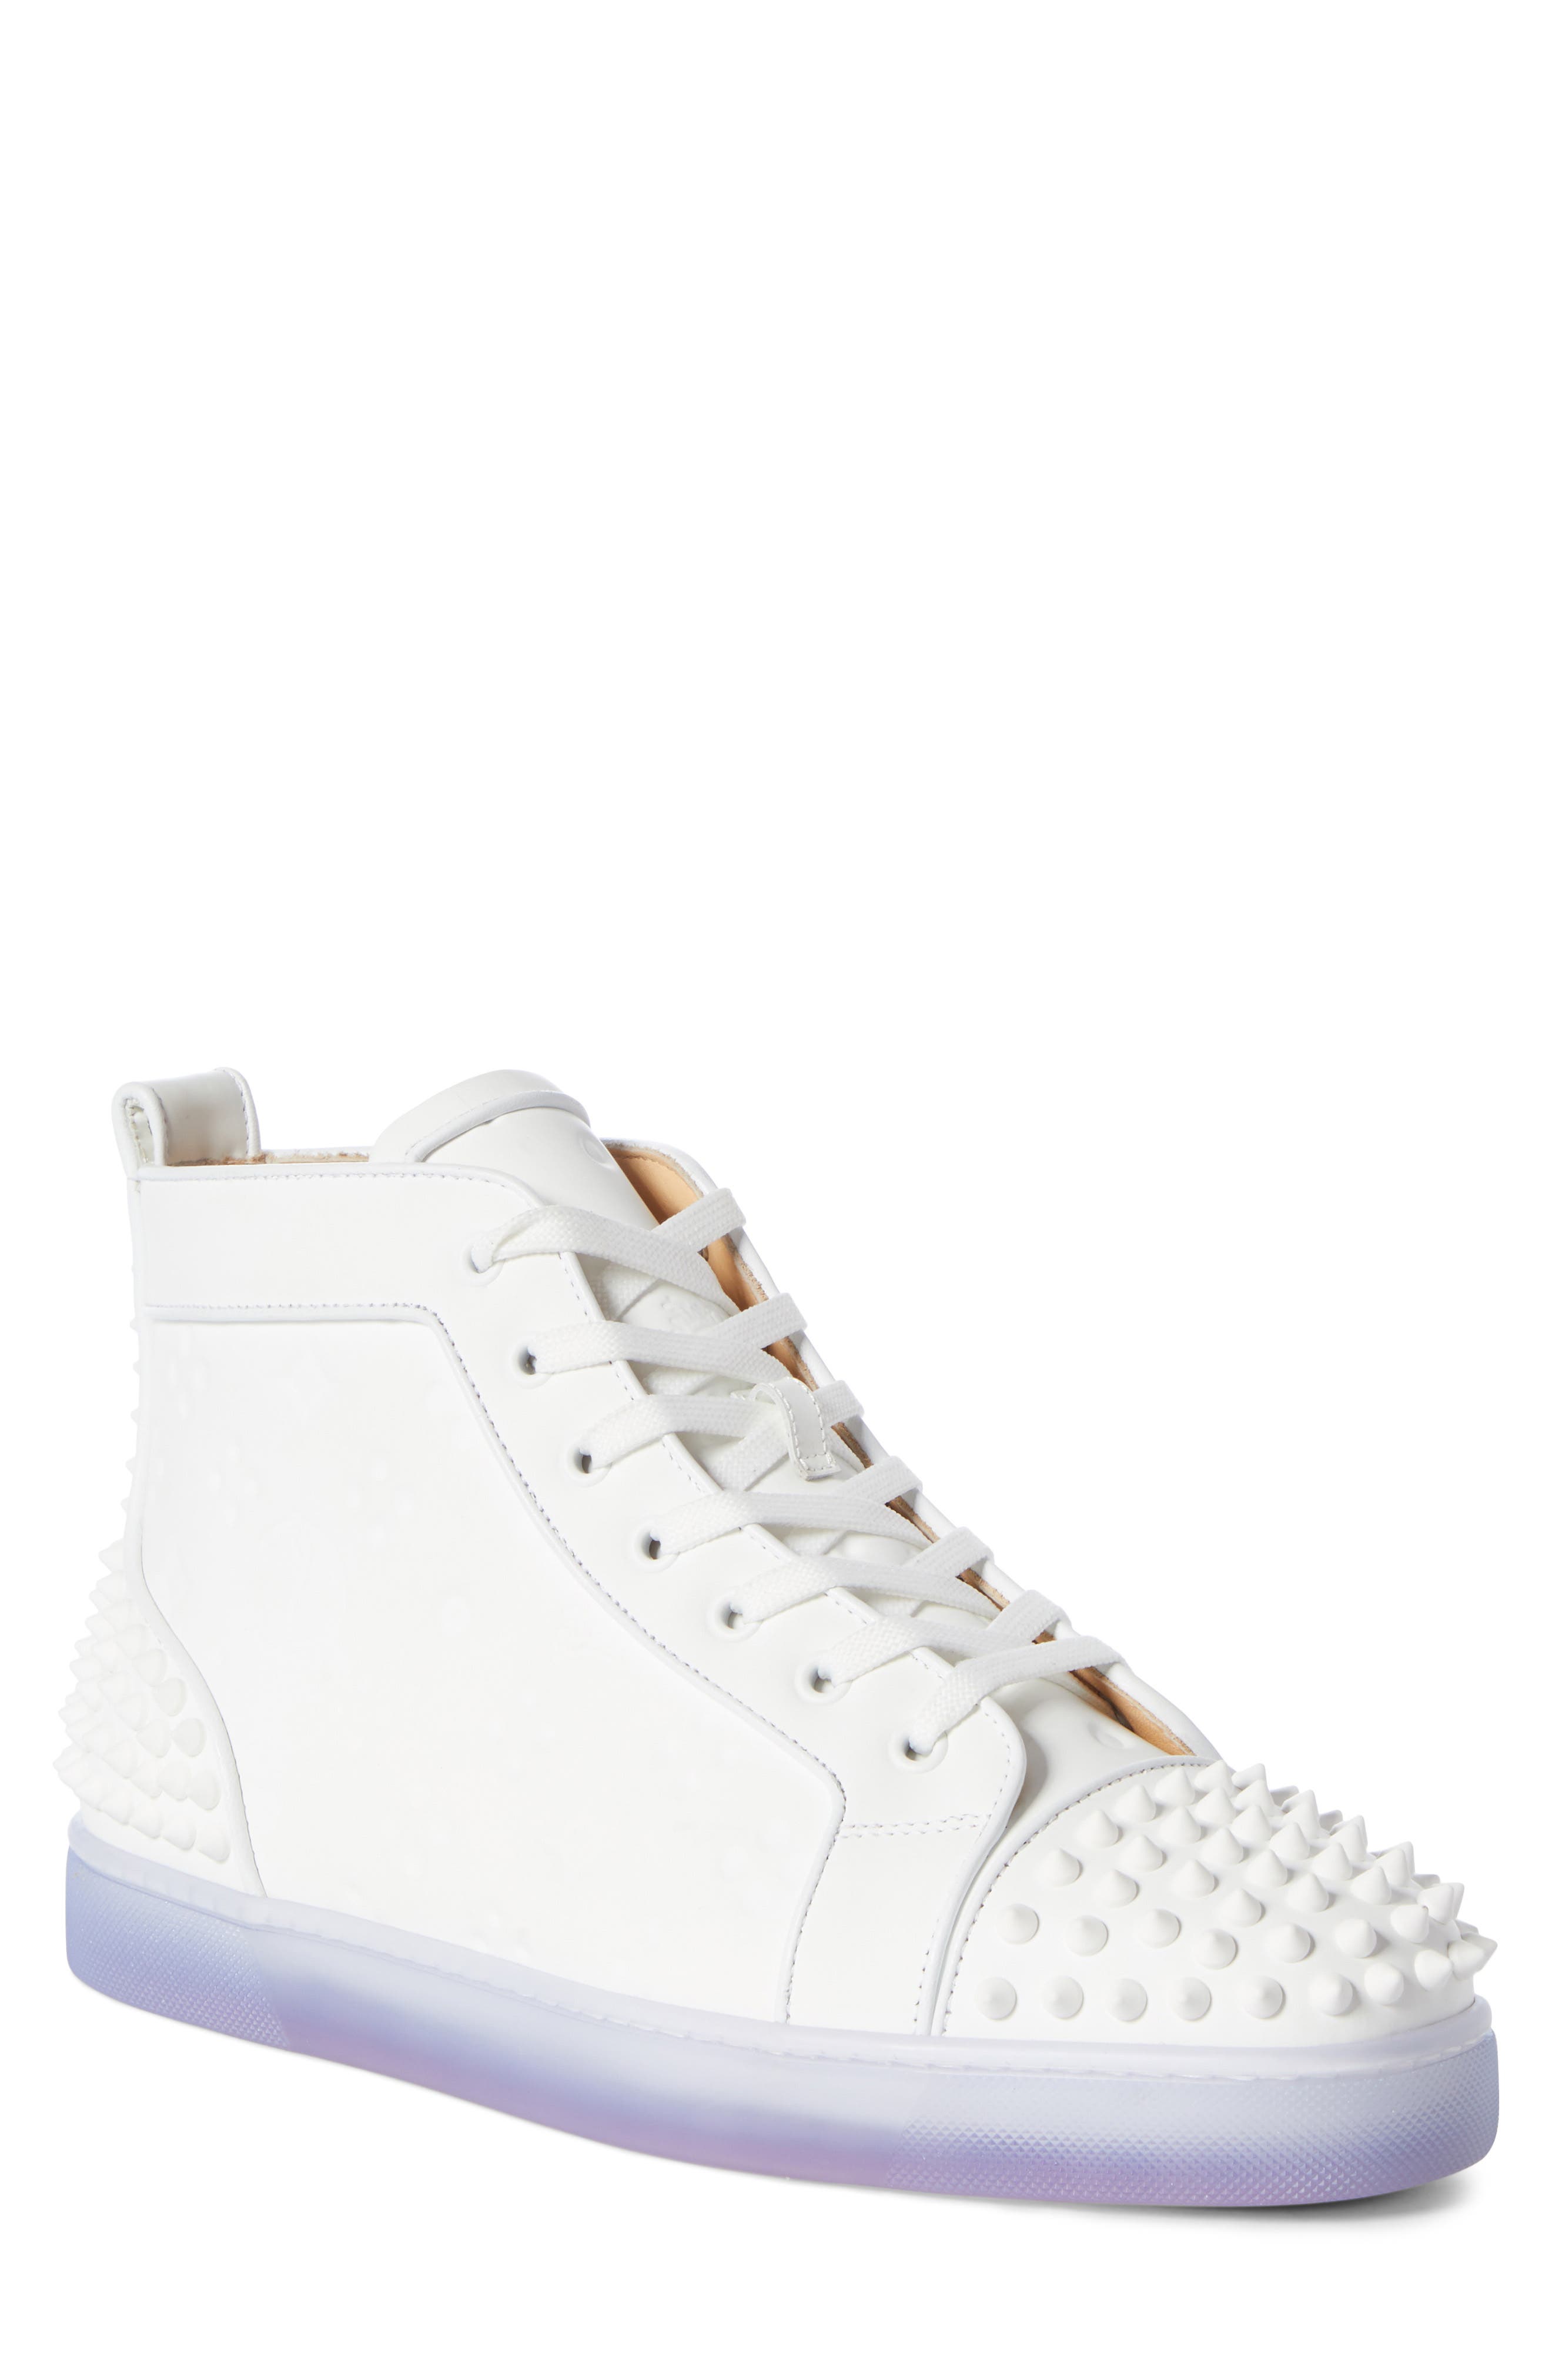 christian louboutin sneakers nordstrom